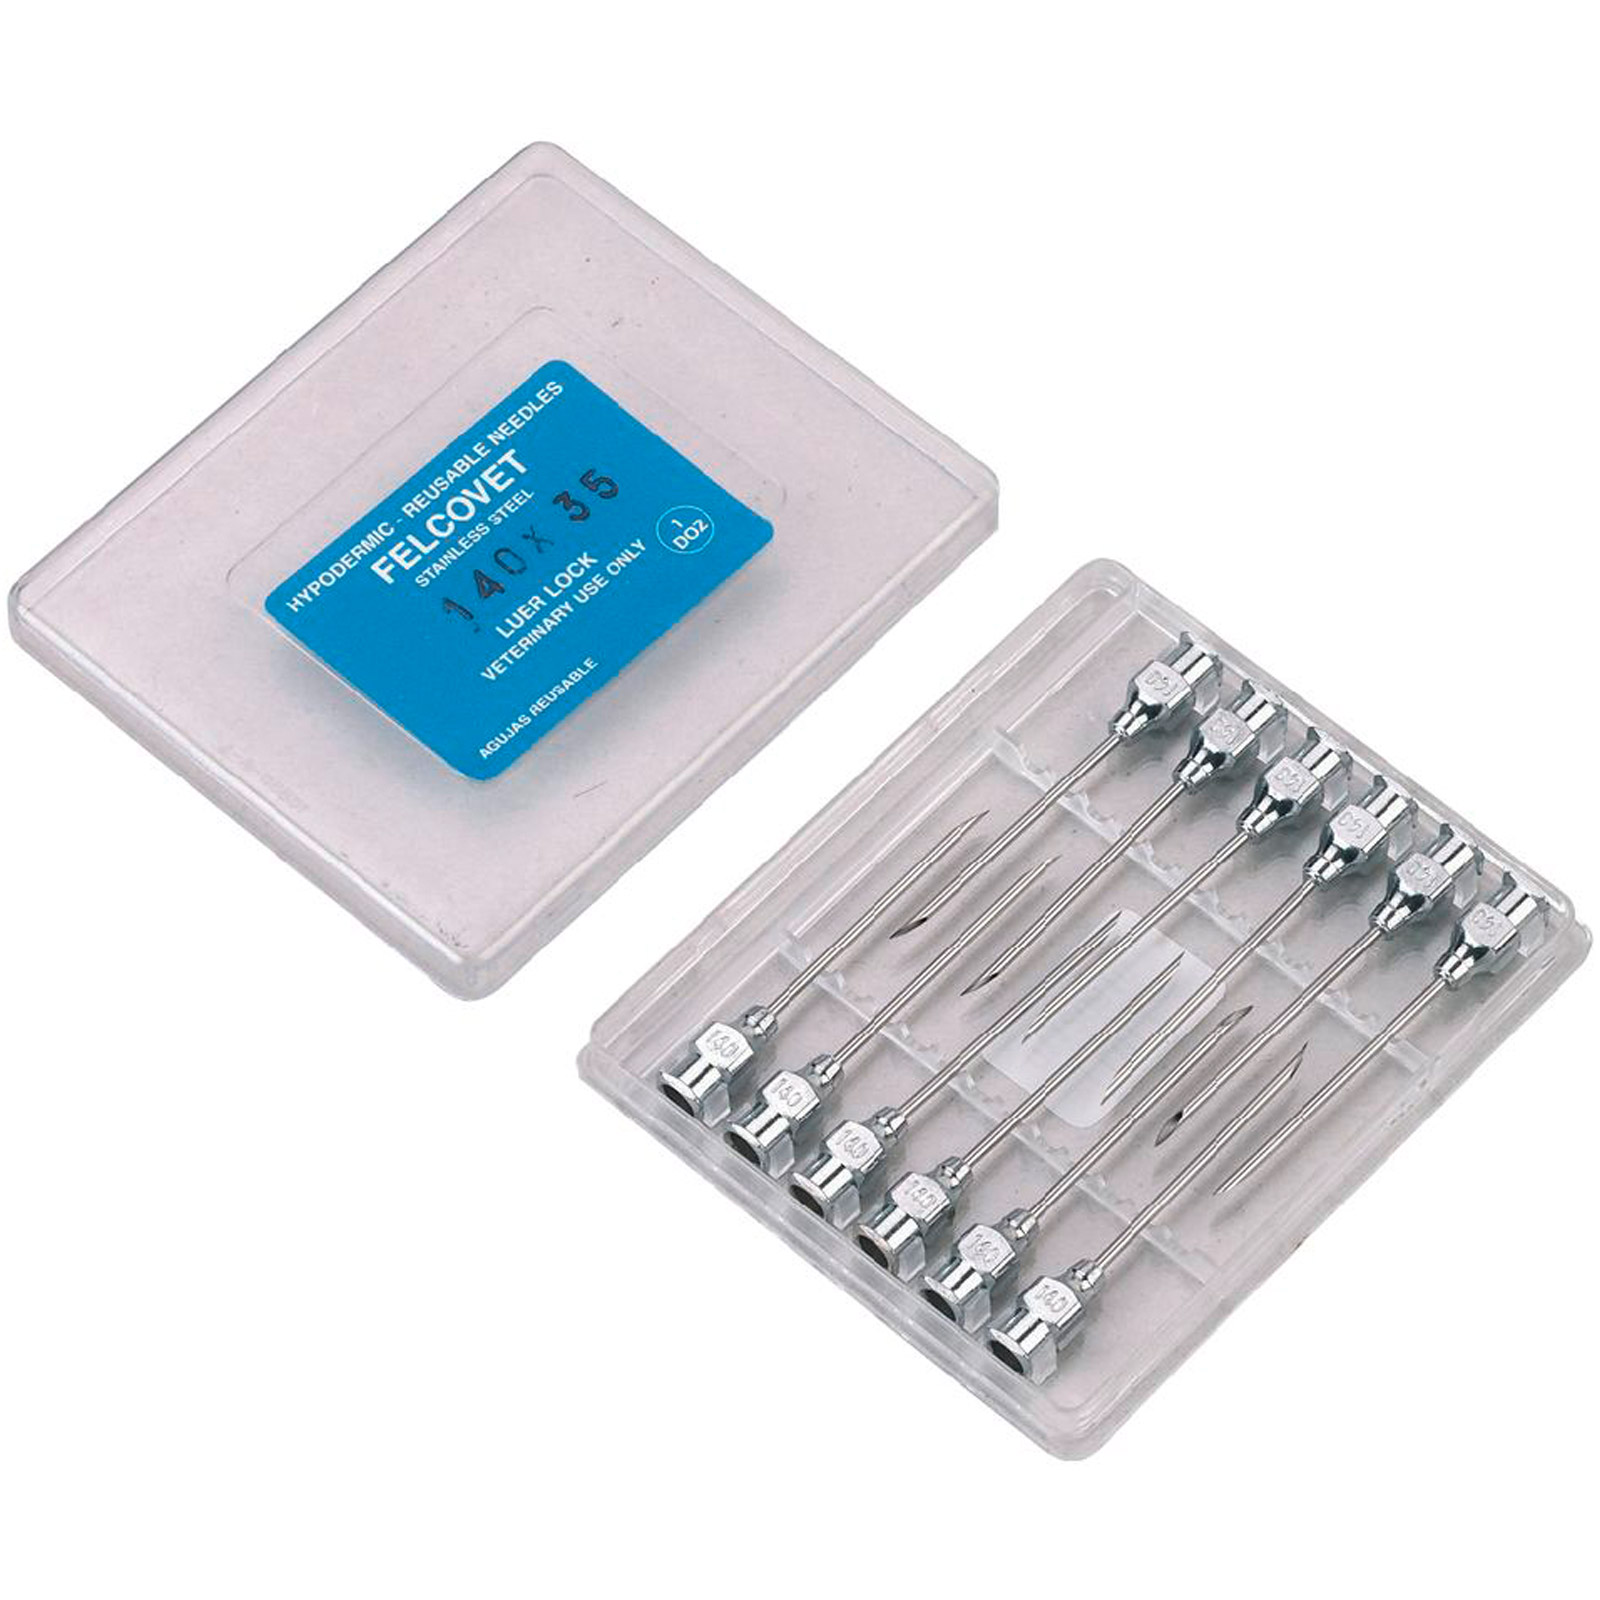 HSW PREMIUM cannula with Luer-Lock attachment 2,2 mm 25 mm